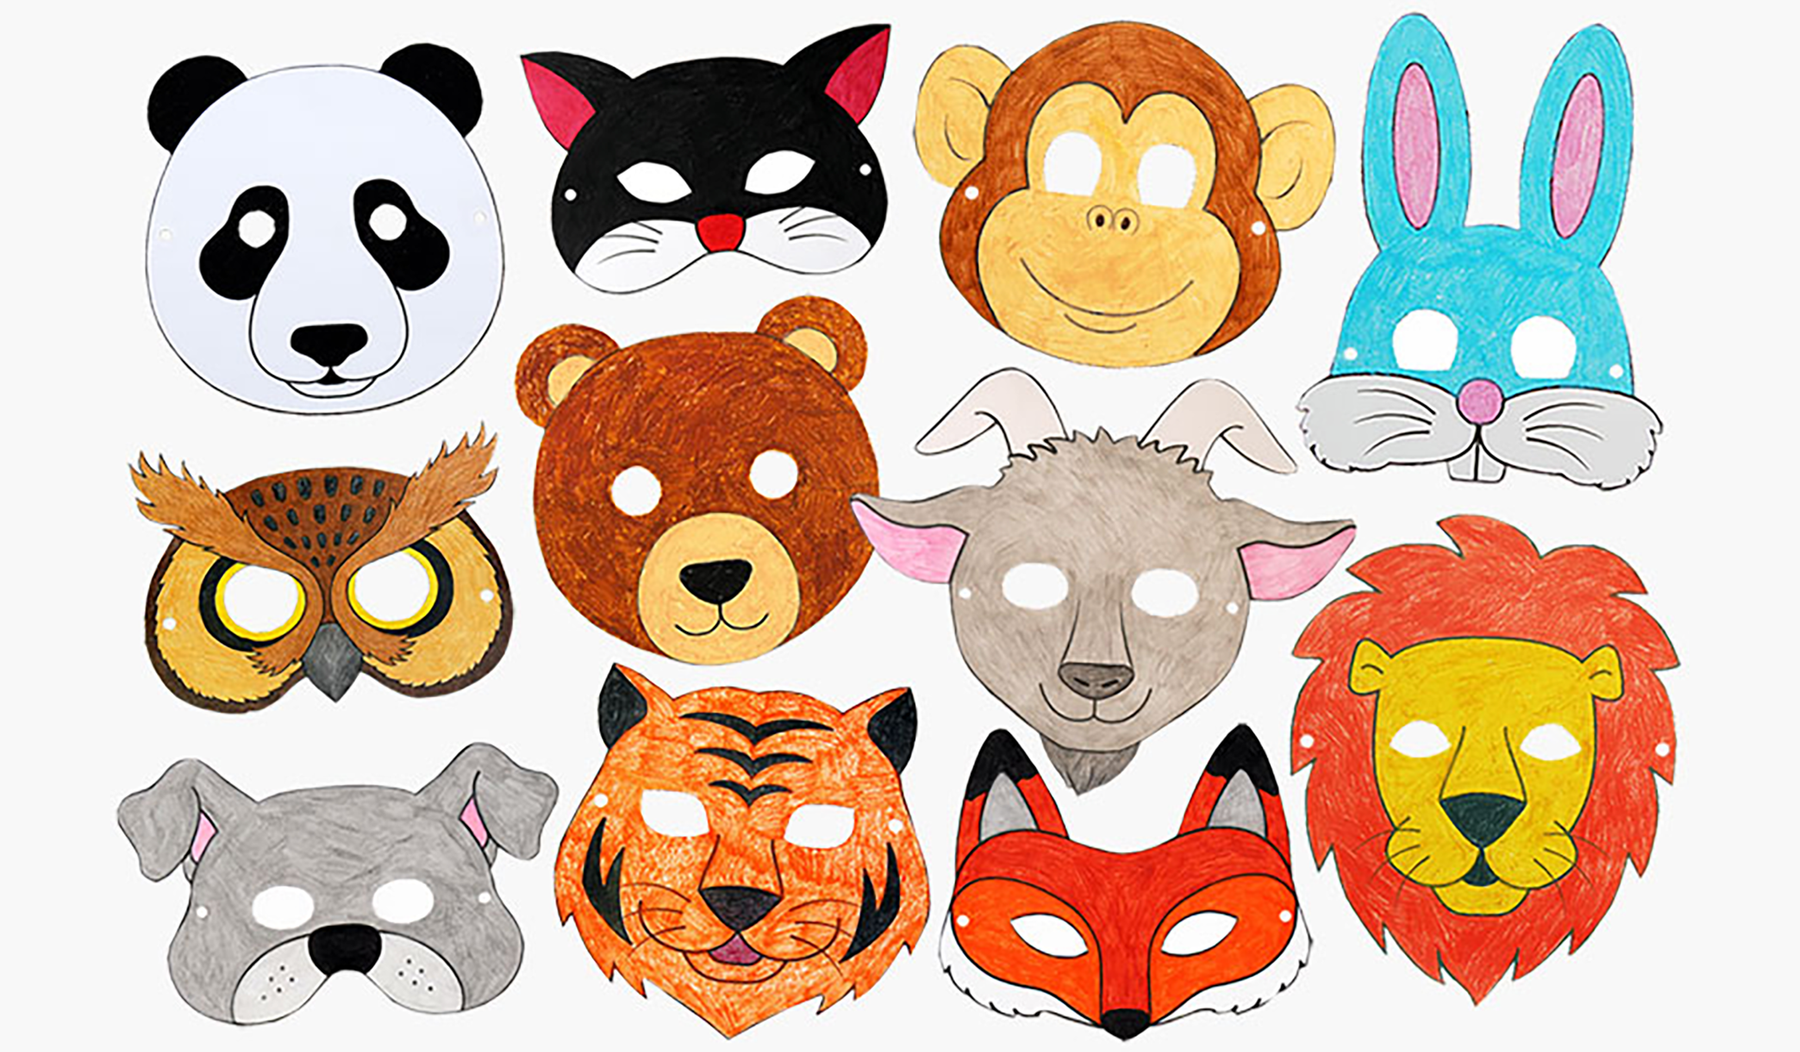 Thirteen colorful eye-masks with thirteen different animal shapes.